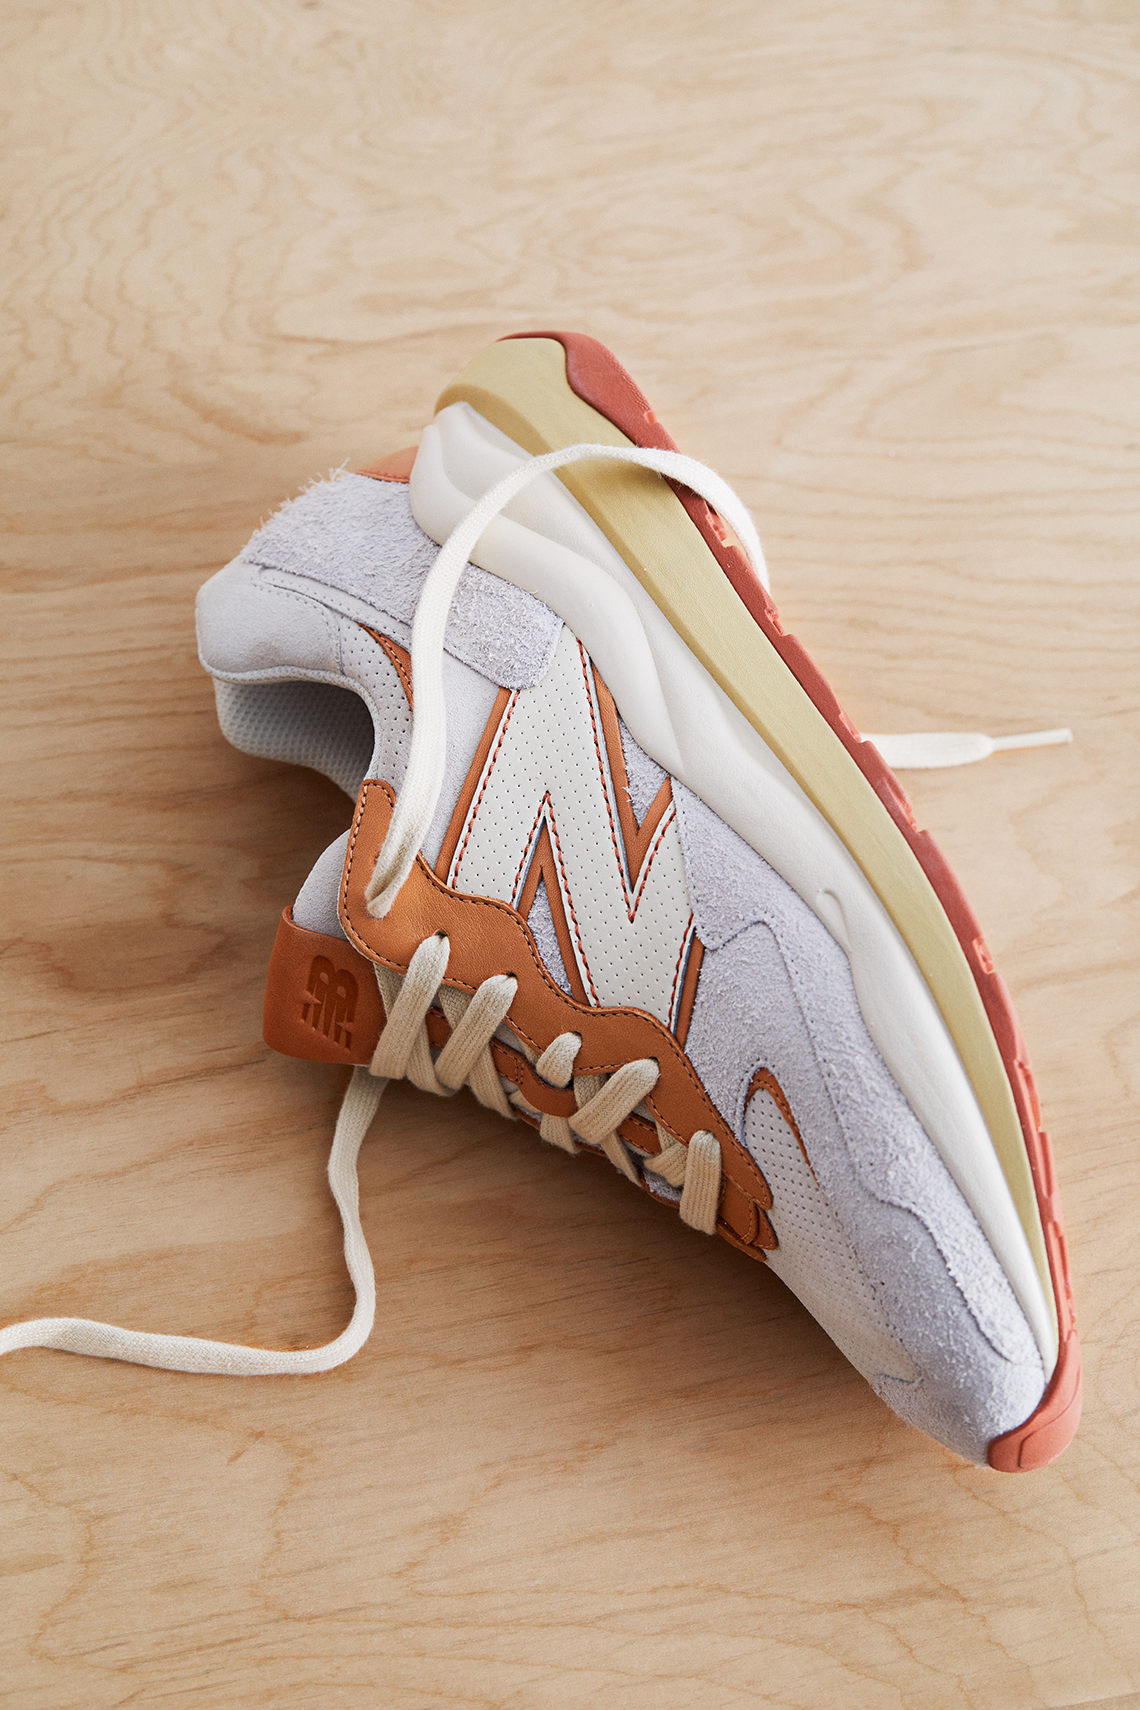 Todd Snyder New Balance 5740 Release Date 1